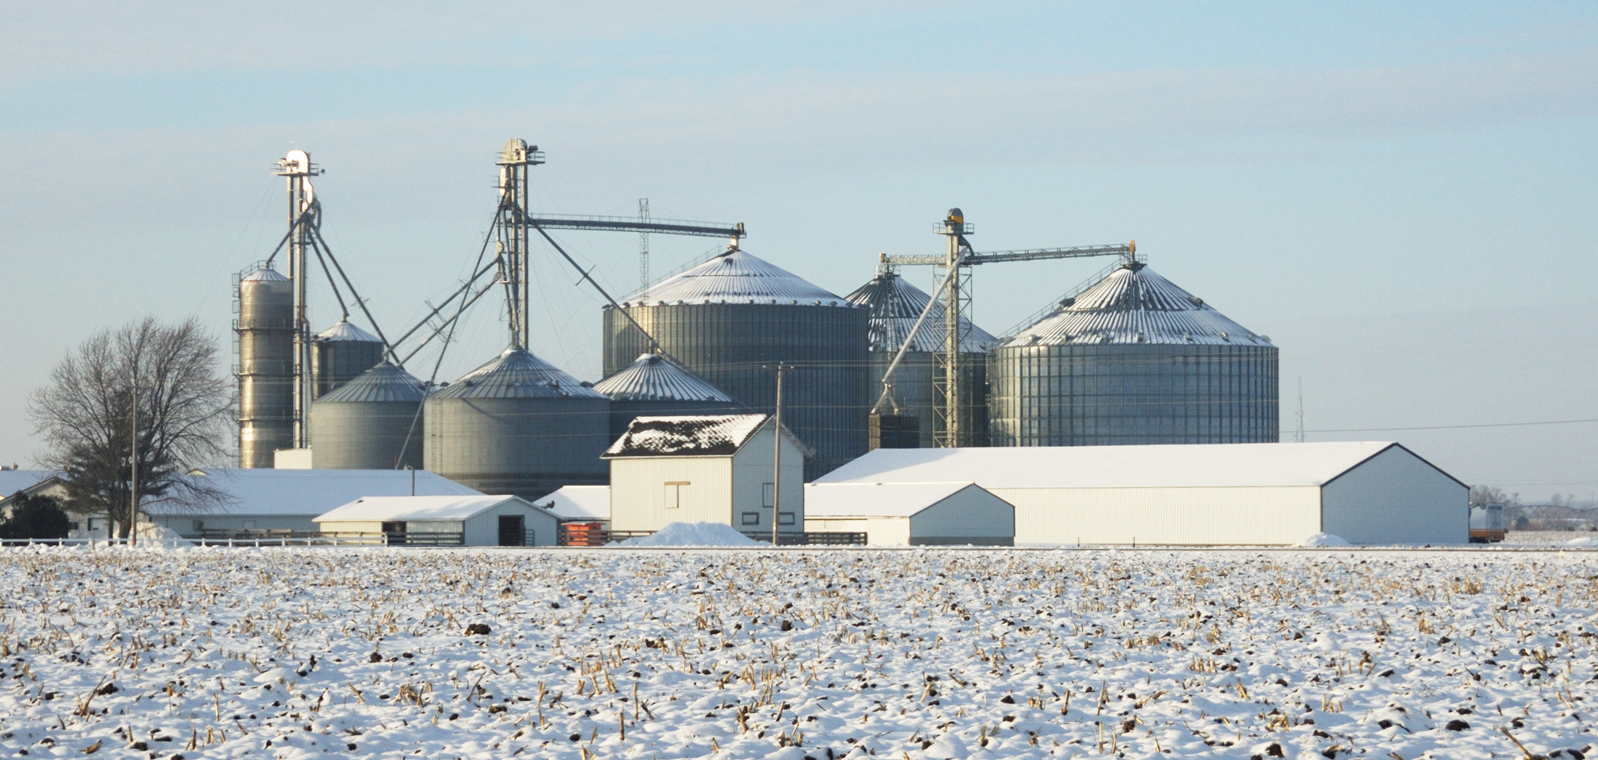 Farm operation with silos and barns on a winter morning